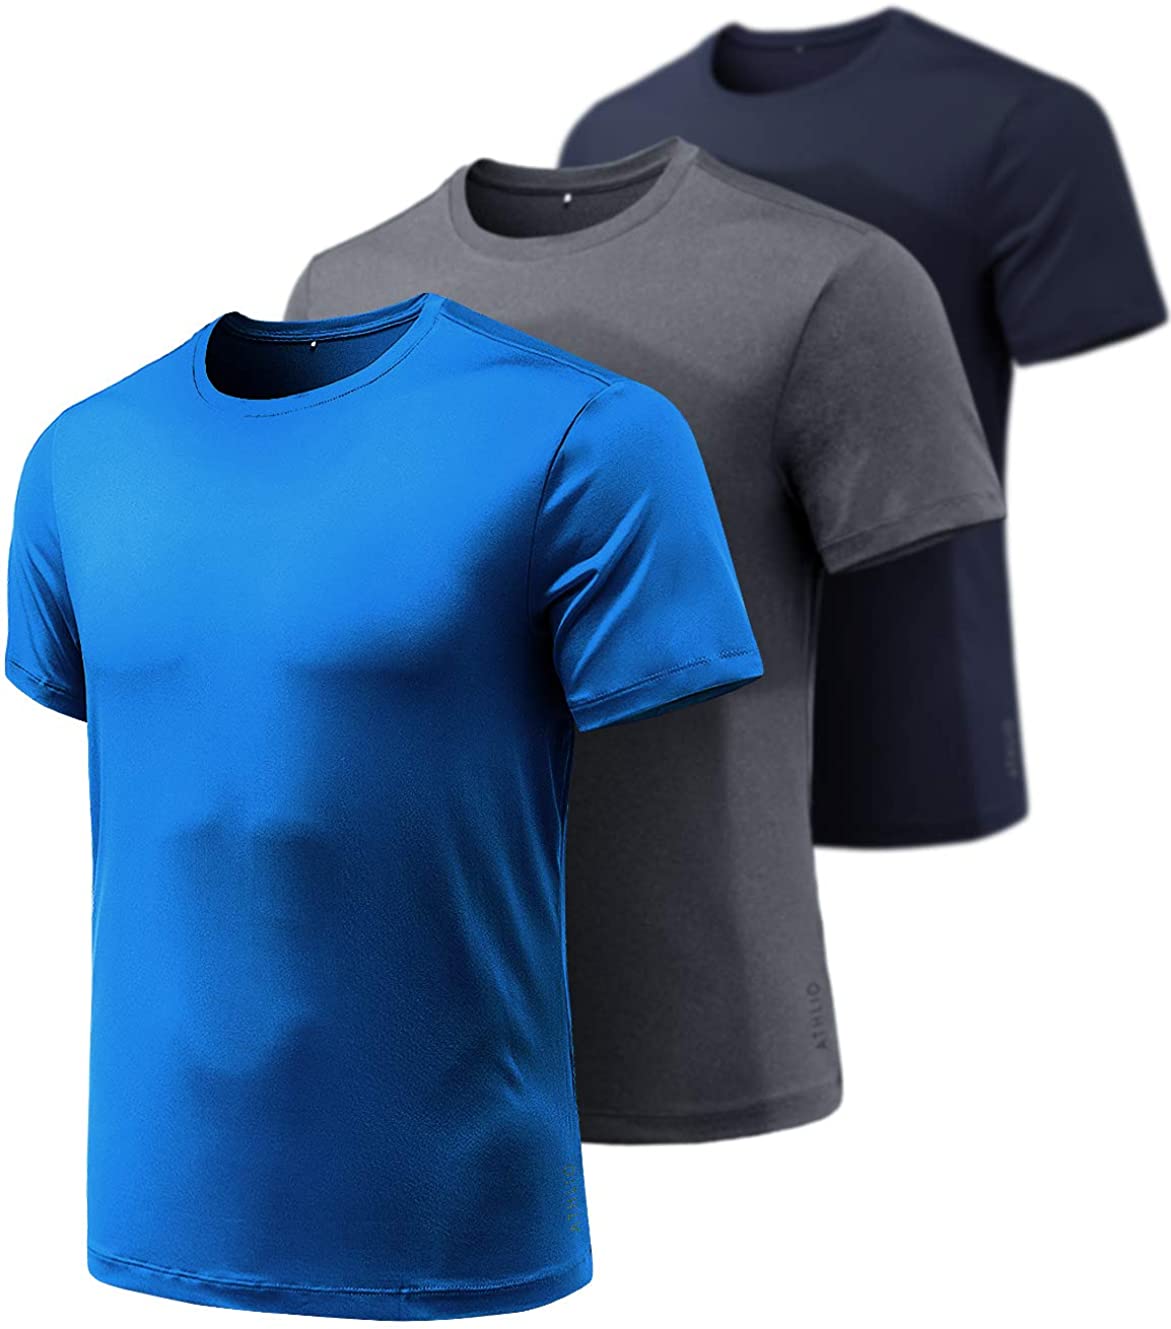 ATHLIO 2 or 3 Pack Men's Workout Running Shirts Short Sleeve Gym T-Shirts Sun Protection Quick Dry Athletic Shirts 